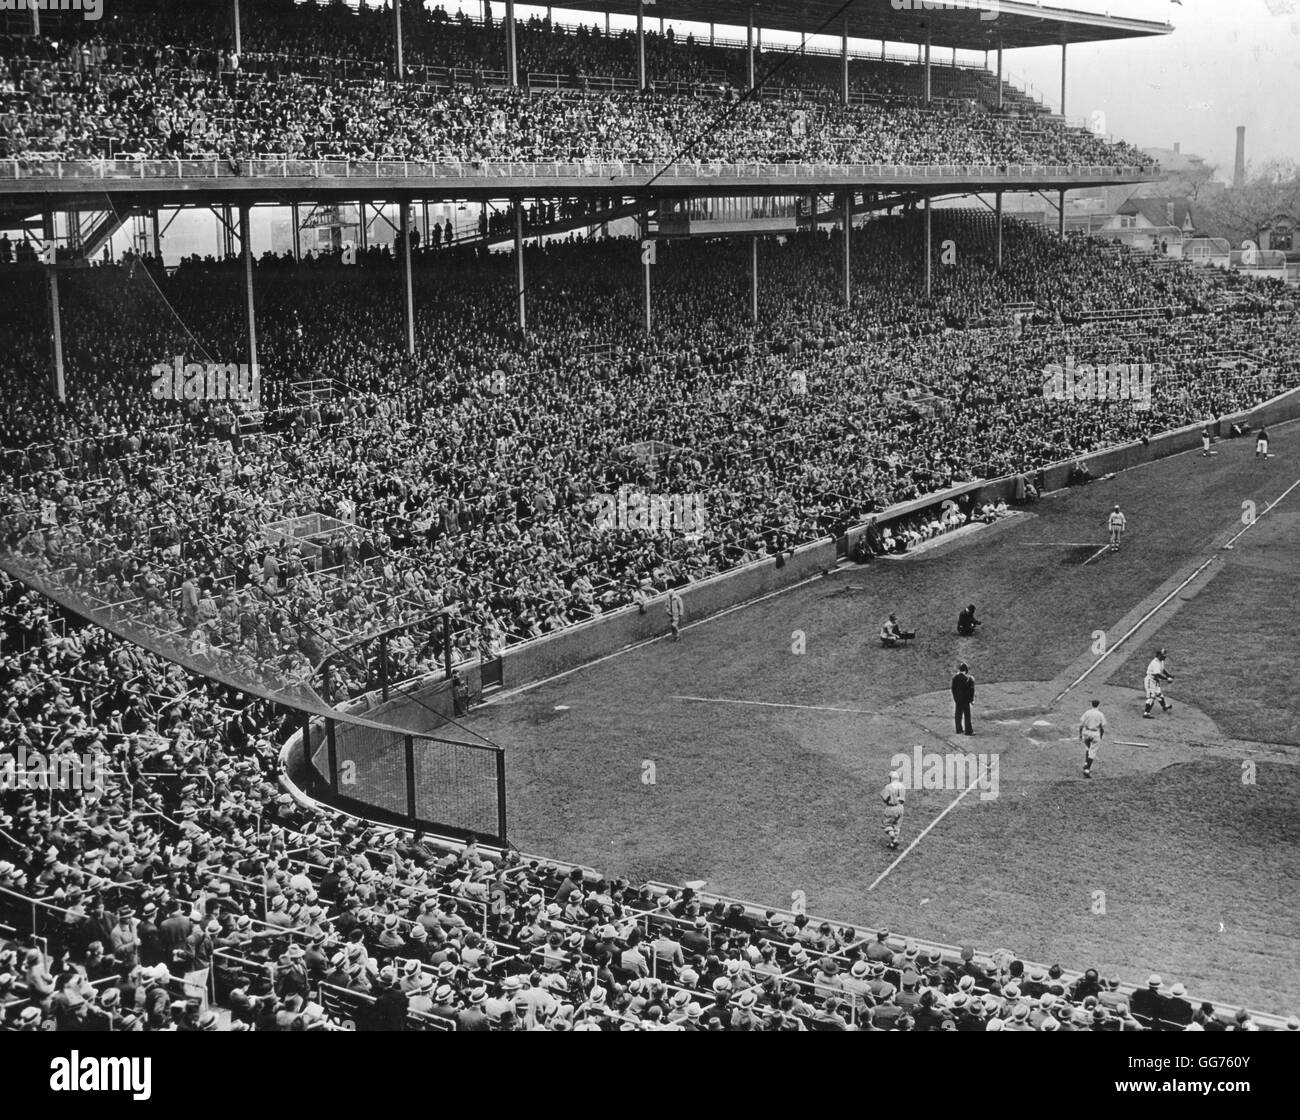 Wrigley Field with a baseball game in progress. Stock Photo